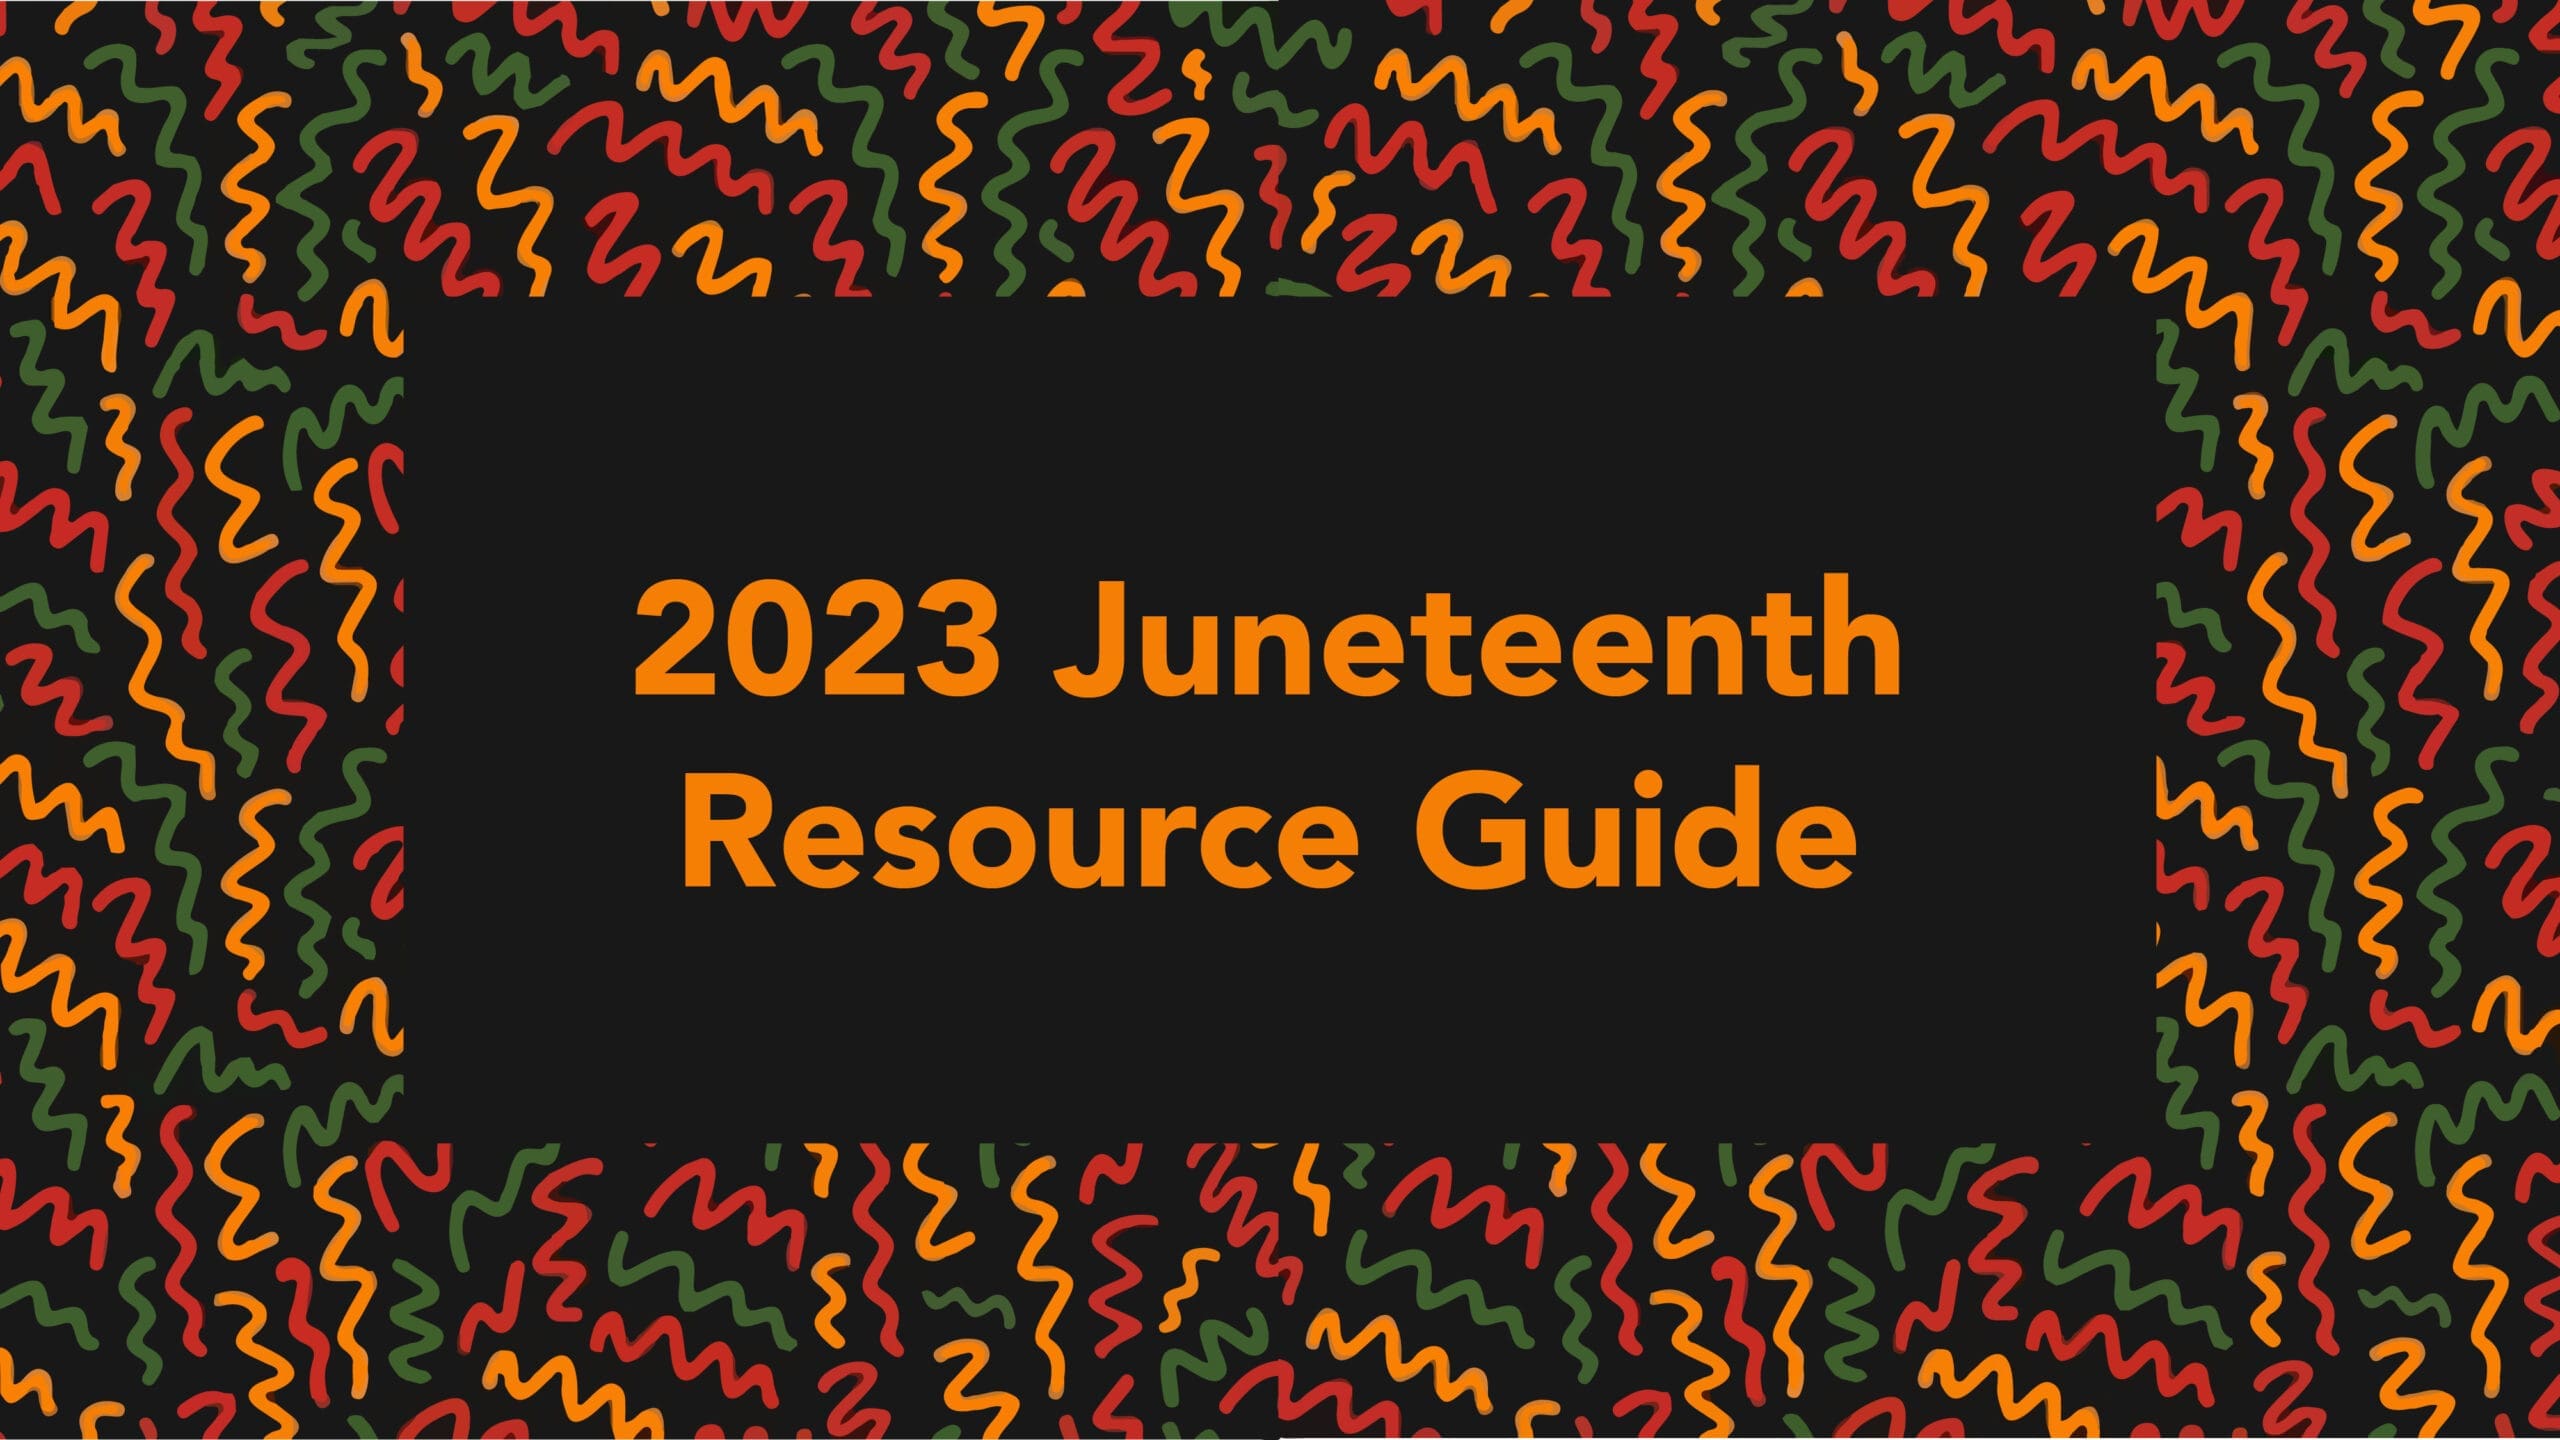 2023 JuneteenthResource Guide on colorful background